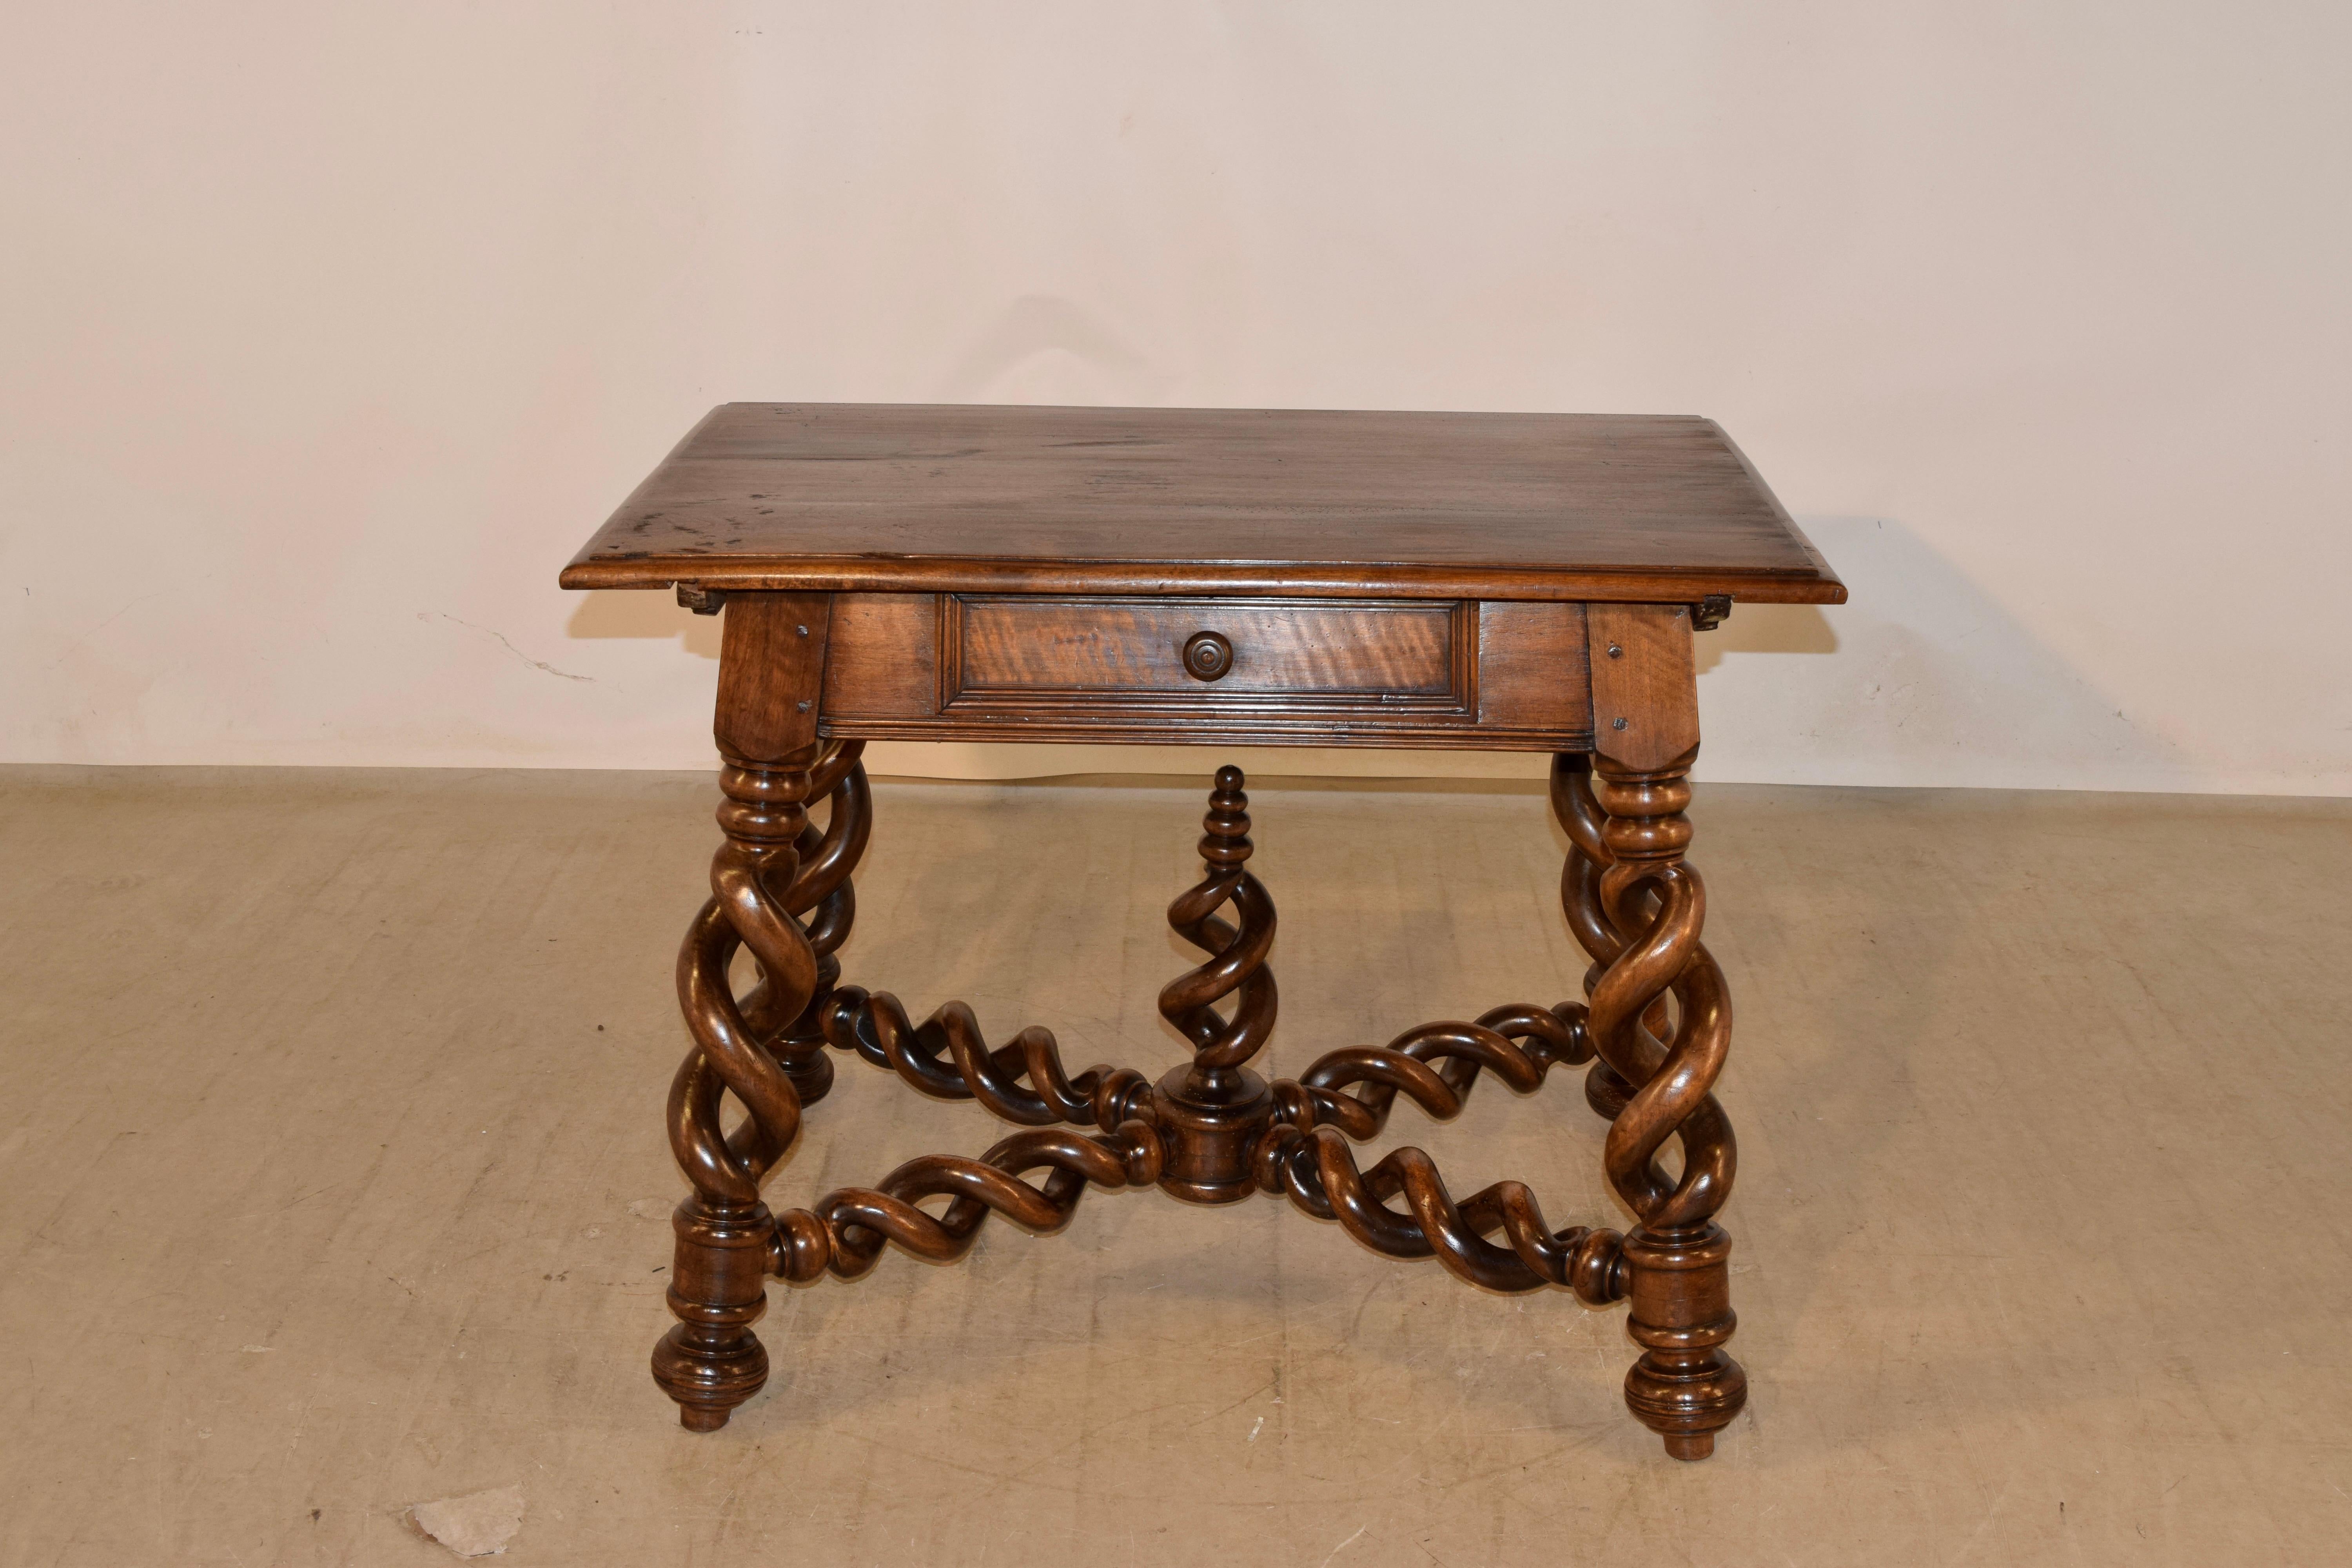 Fabulous 19th century walnut side table from France with a beveled edge around the top, following down to a simple apron with a lower molded edge and a single drawer in the front. the table is supported on hand turned exquisite open barley twist